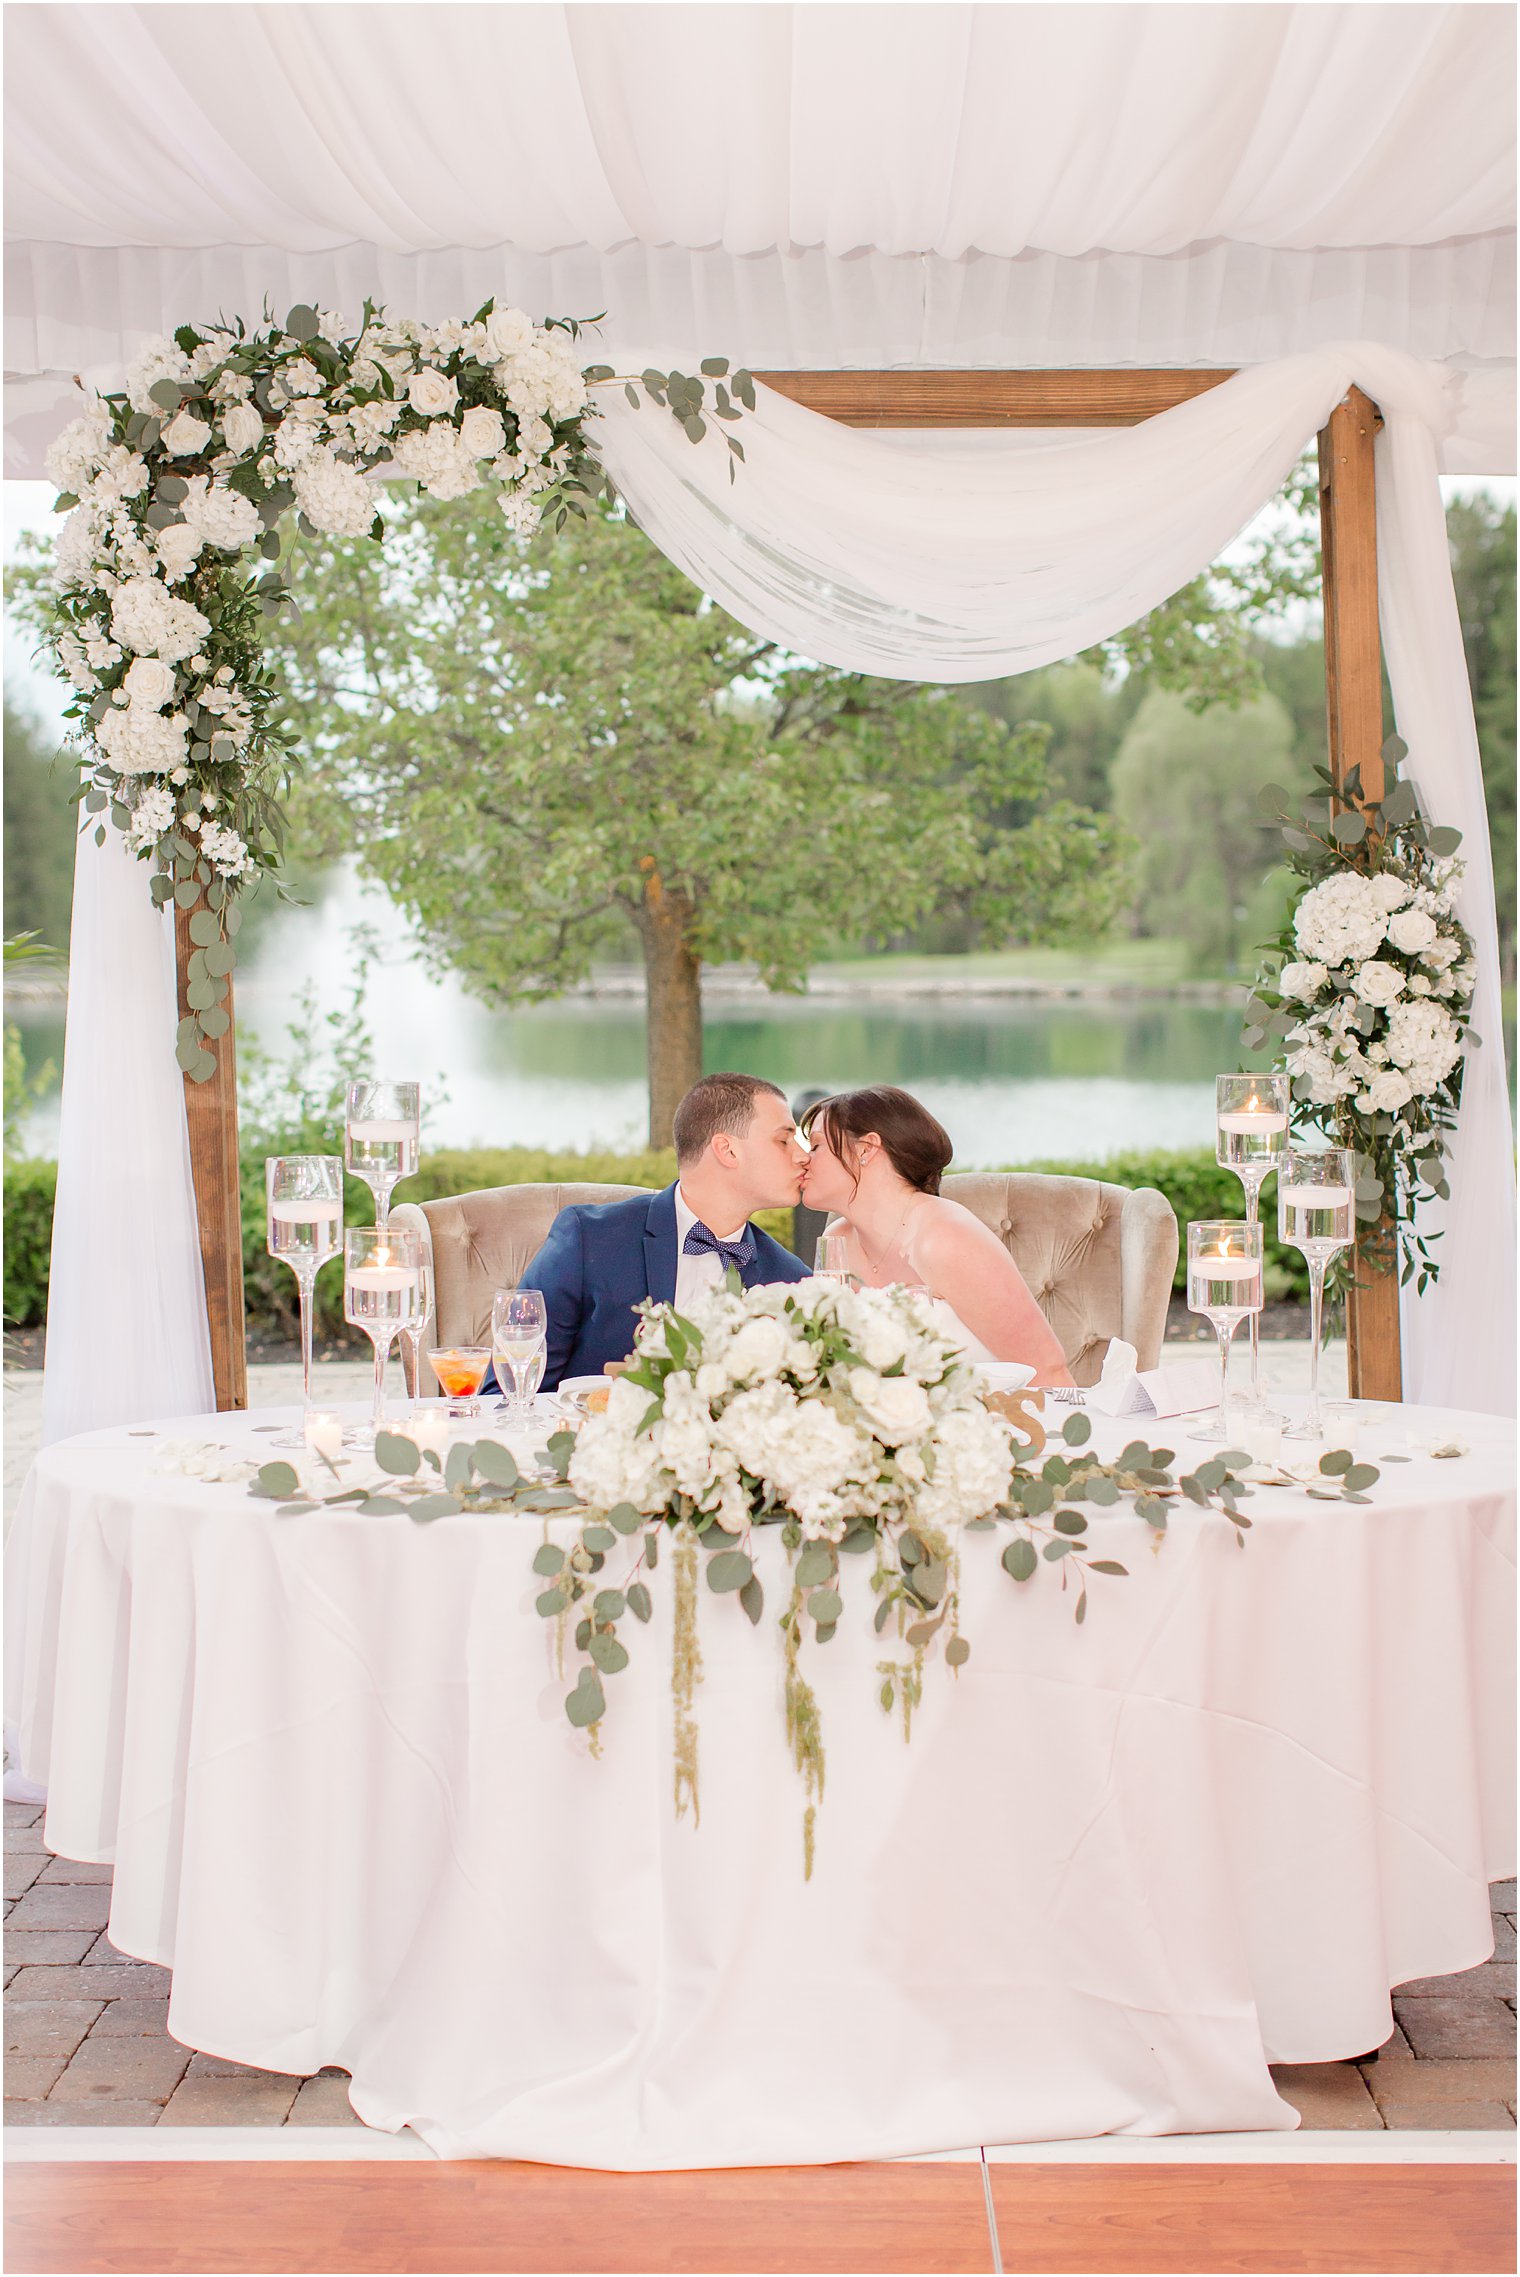 Wedding florals at Windows on the Water at Frogbridge Wedding | Florals by Bespoke Floral and Design